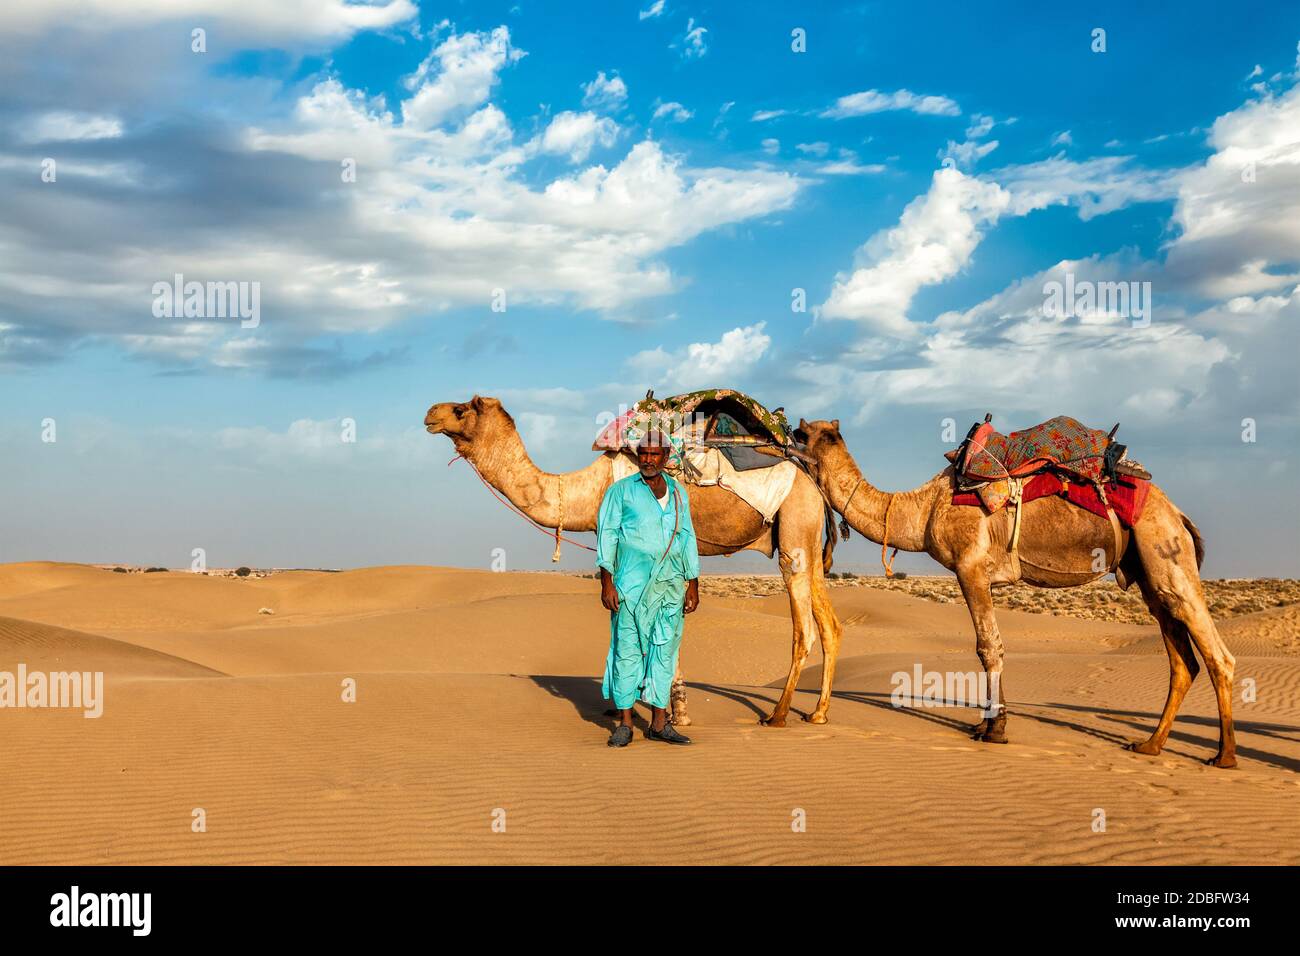 Rajasthan travel background - cameleer indiano (camel driver) con i cammelli in dune del deserto di Thar. Jaisalmer, Rajasthan, India Foto Stock